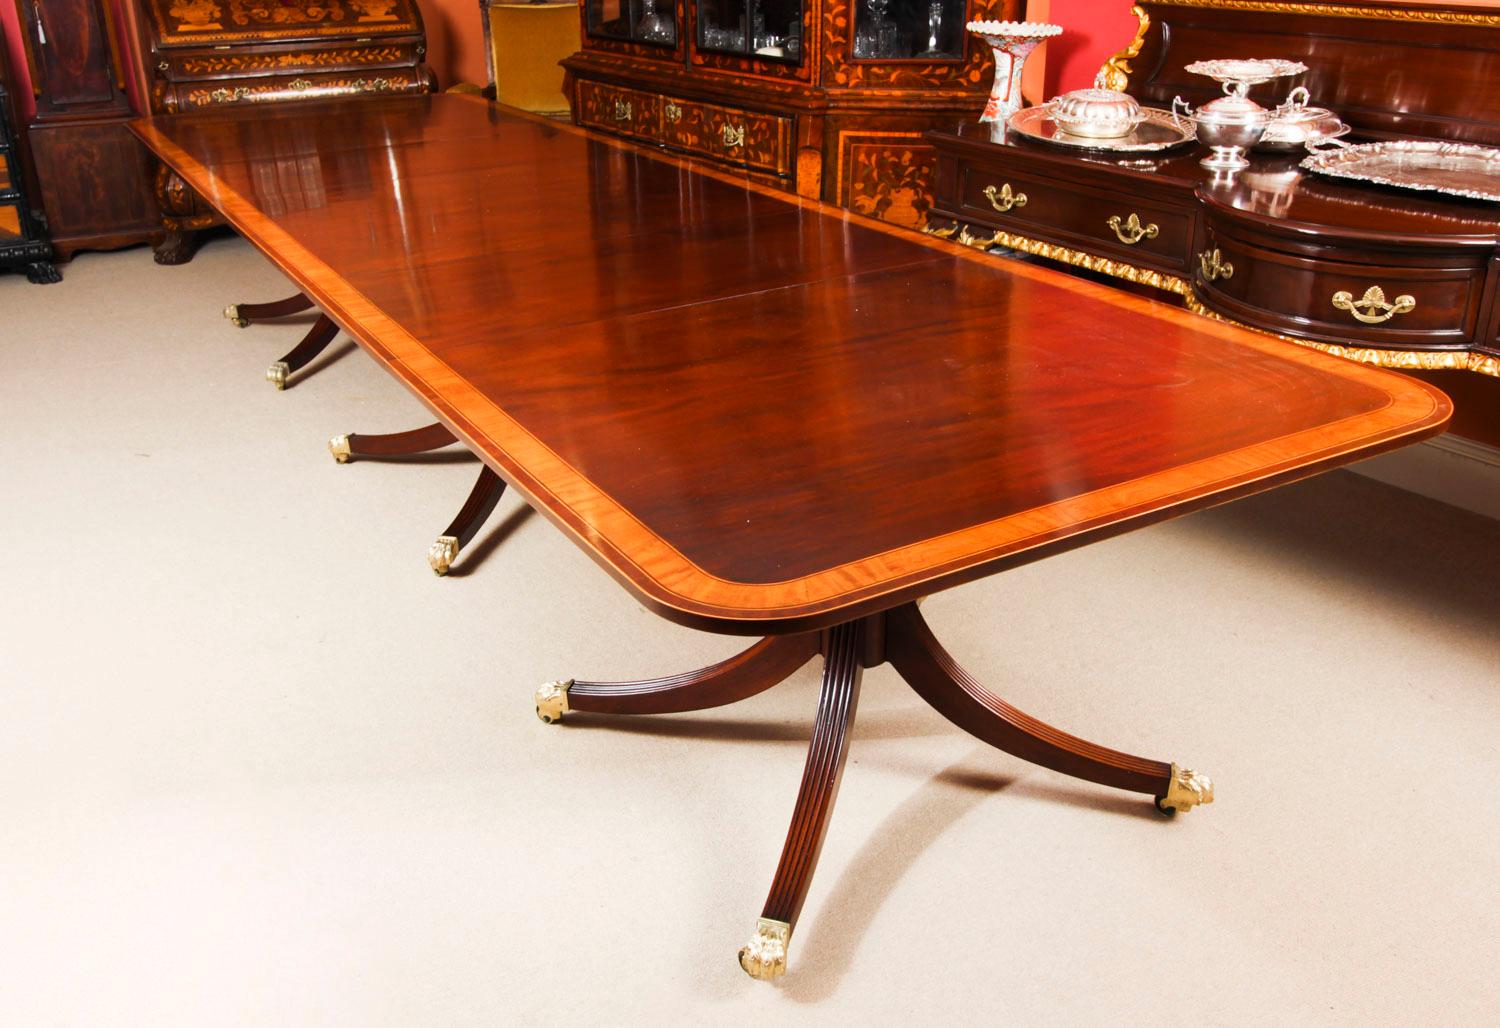 This is a superb dining set comprising a 14ft antique Regency Revival dining table, dating from the late 19th century, with a matching set of fourteen vintage dining chairs.
The dining table is crafted in flame mahogany and features superb